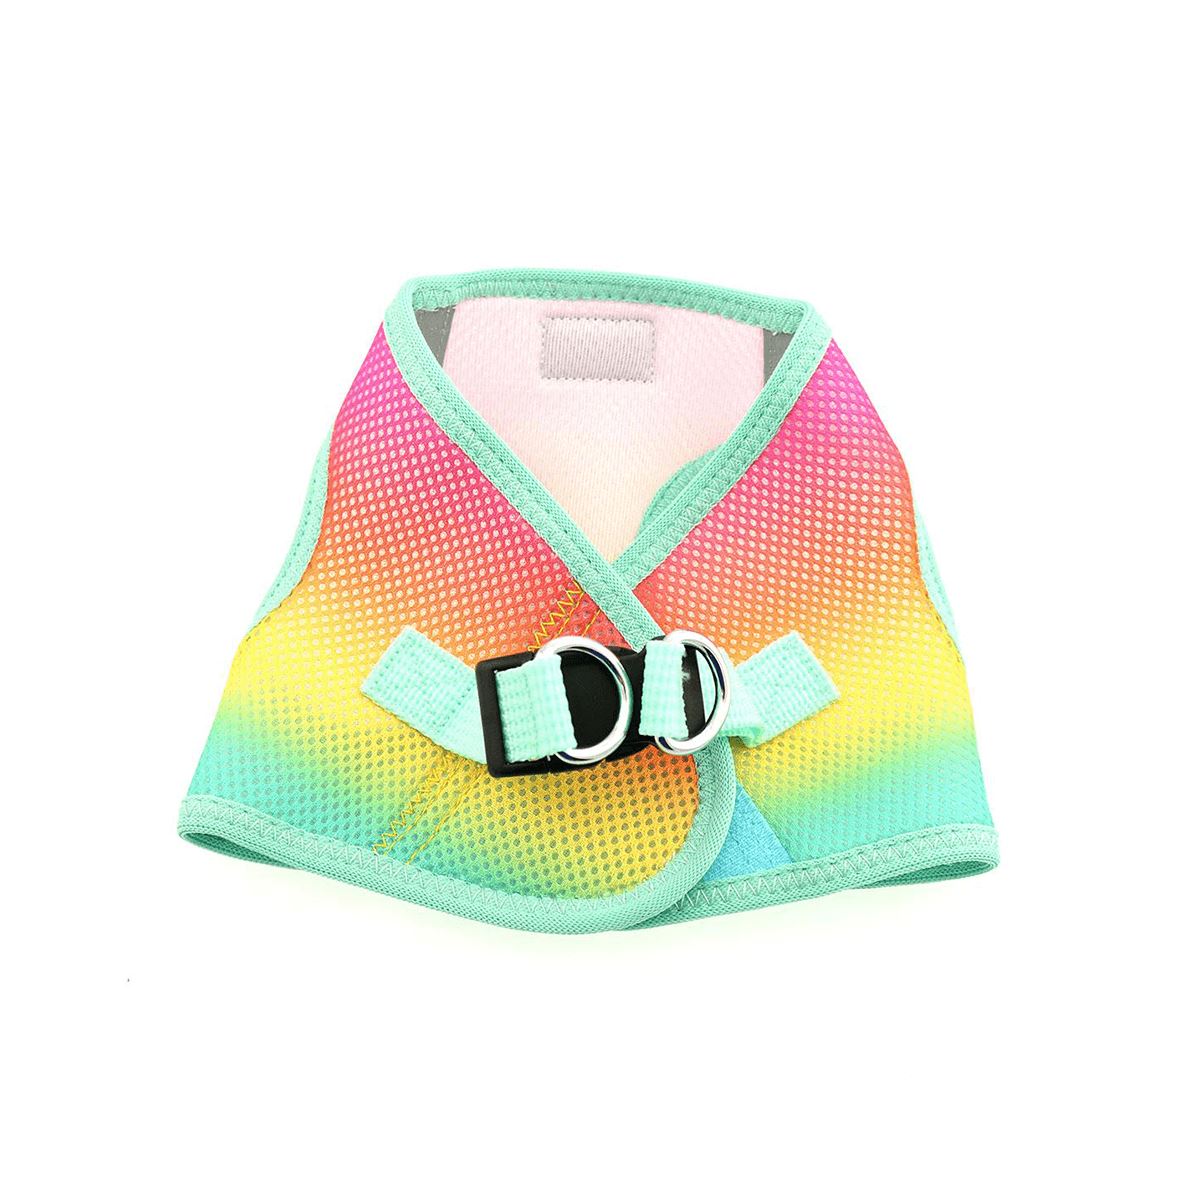 American River Choke Free Dog Harness - Ombre Beach Party | Pawlicious & Company